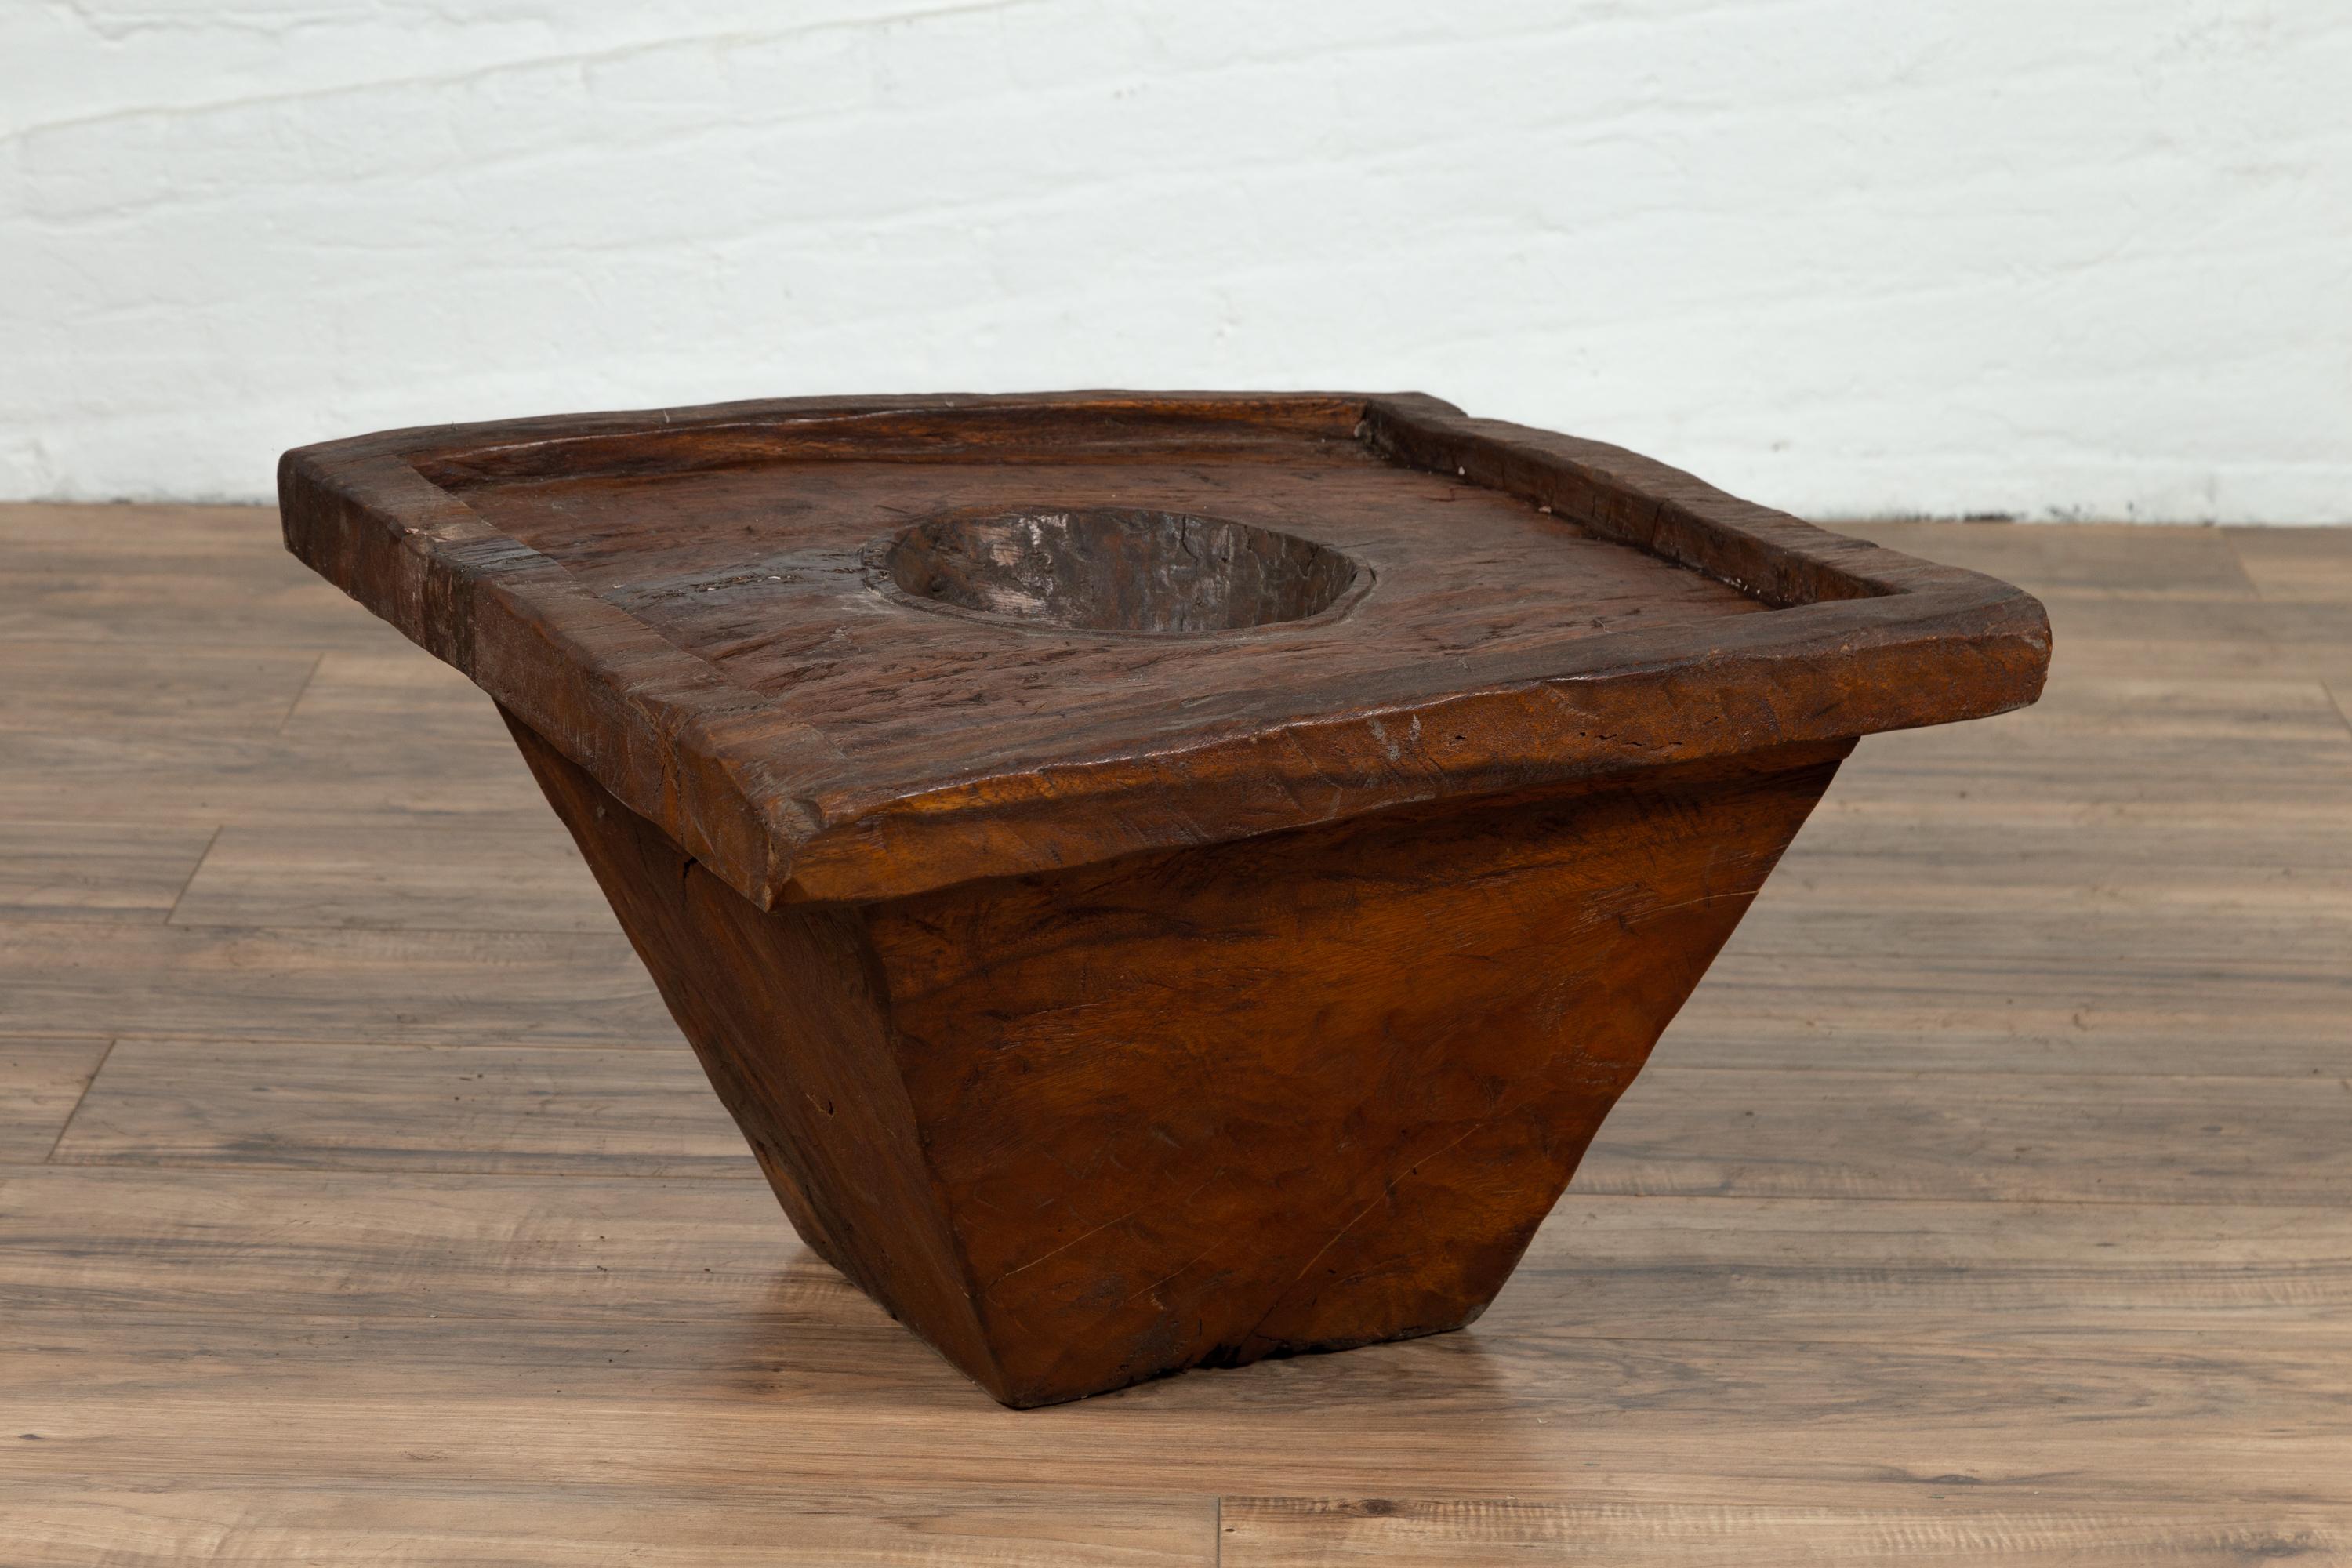 Wooden Indonesian Brown Mortar Planter from the Early 20th Century For Sale 4